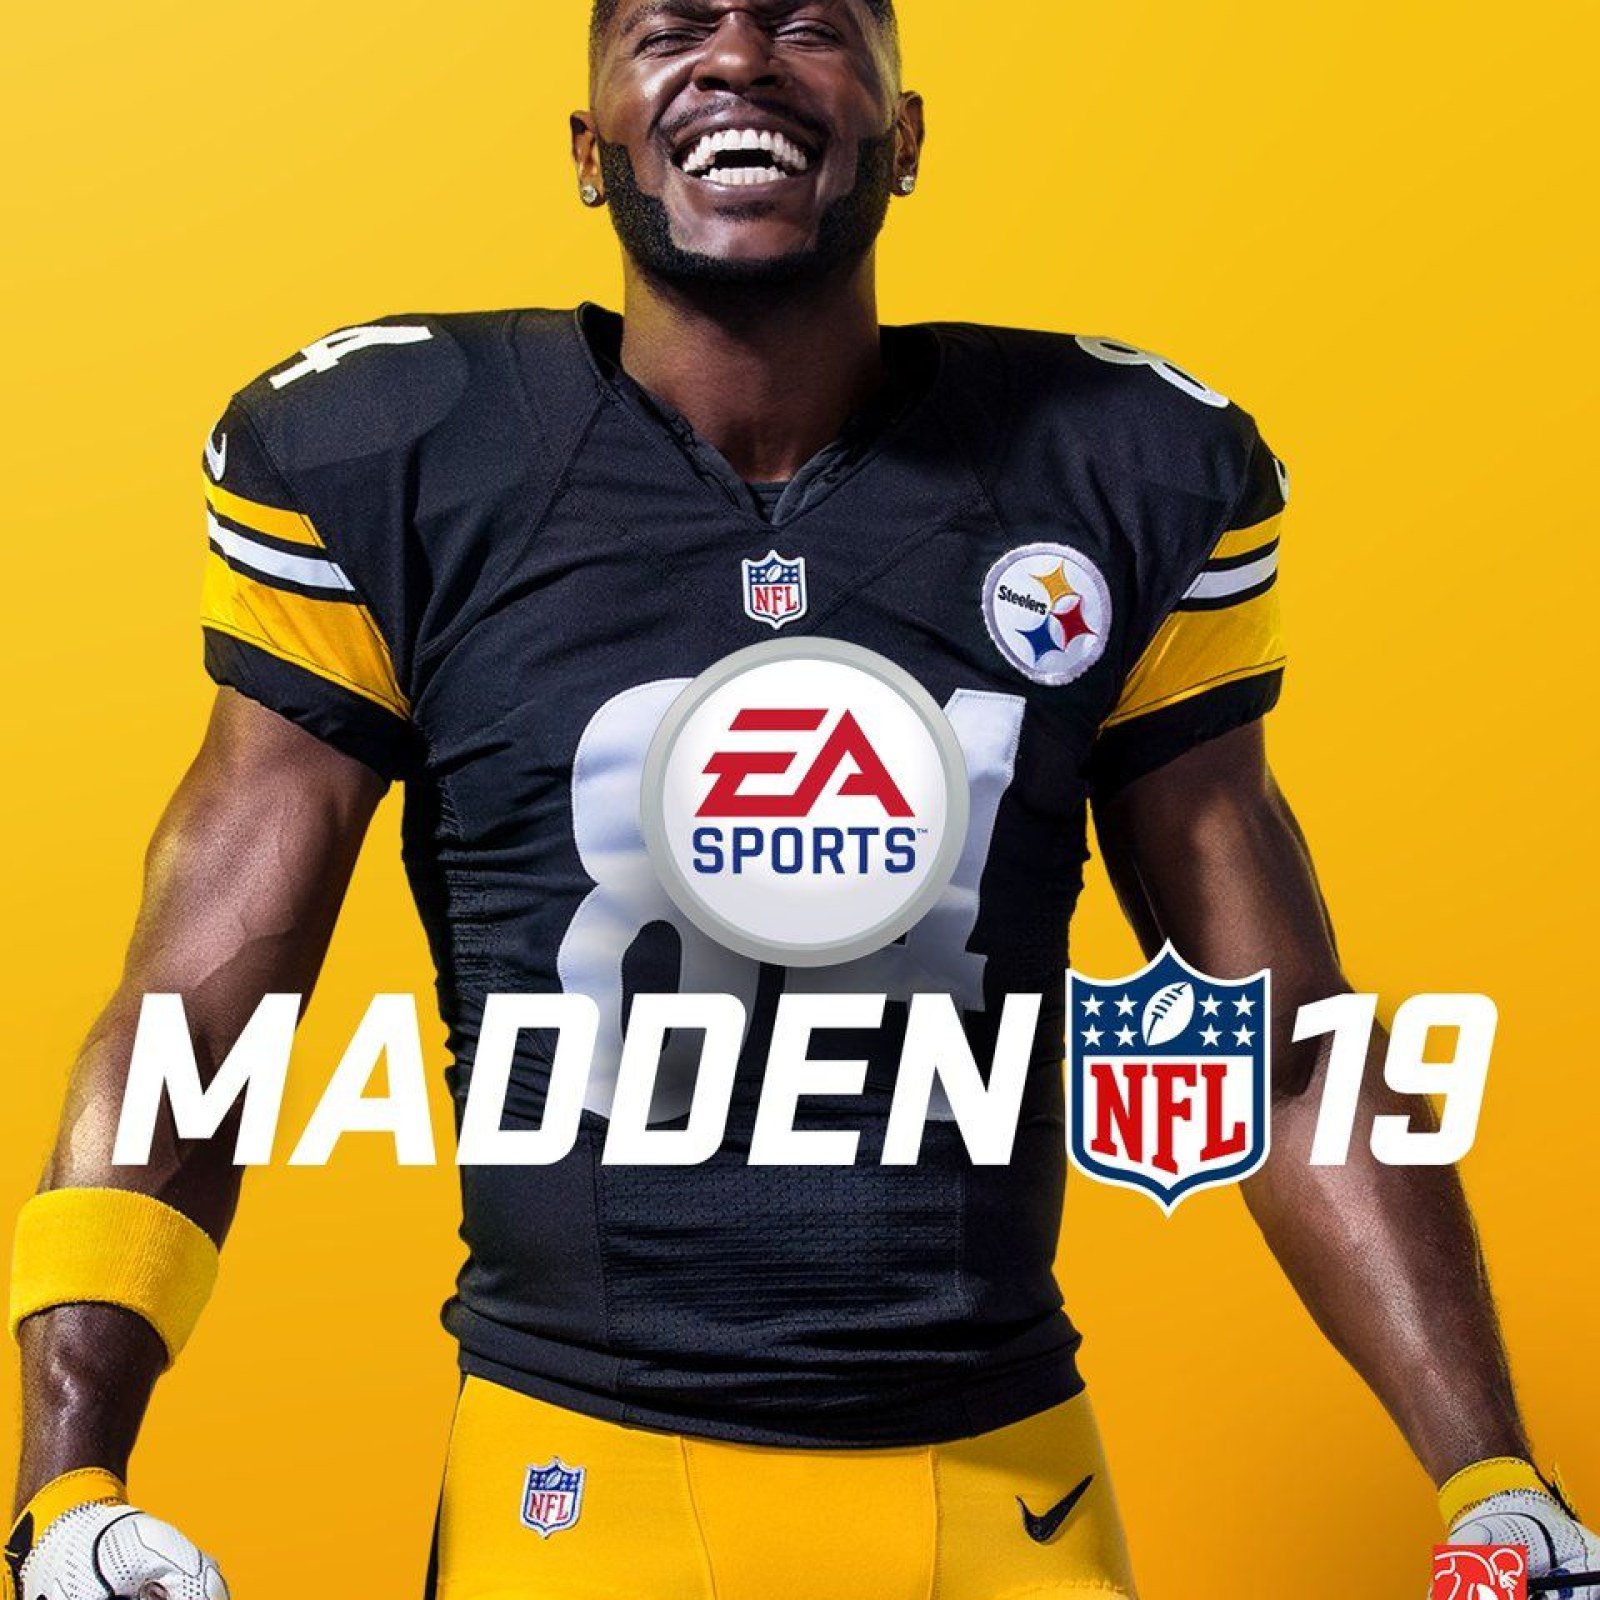 Madden NFL 19' Cover Athlete is Antonio Brown